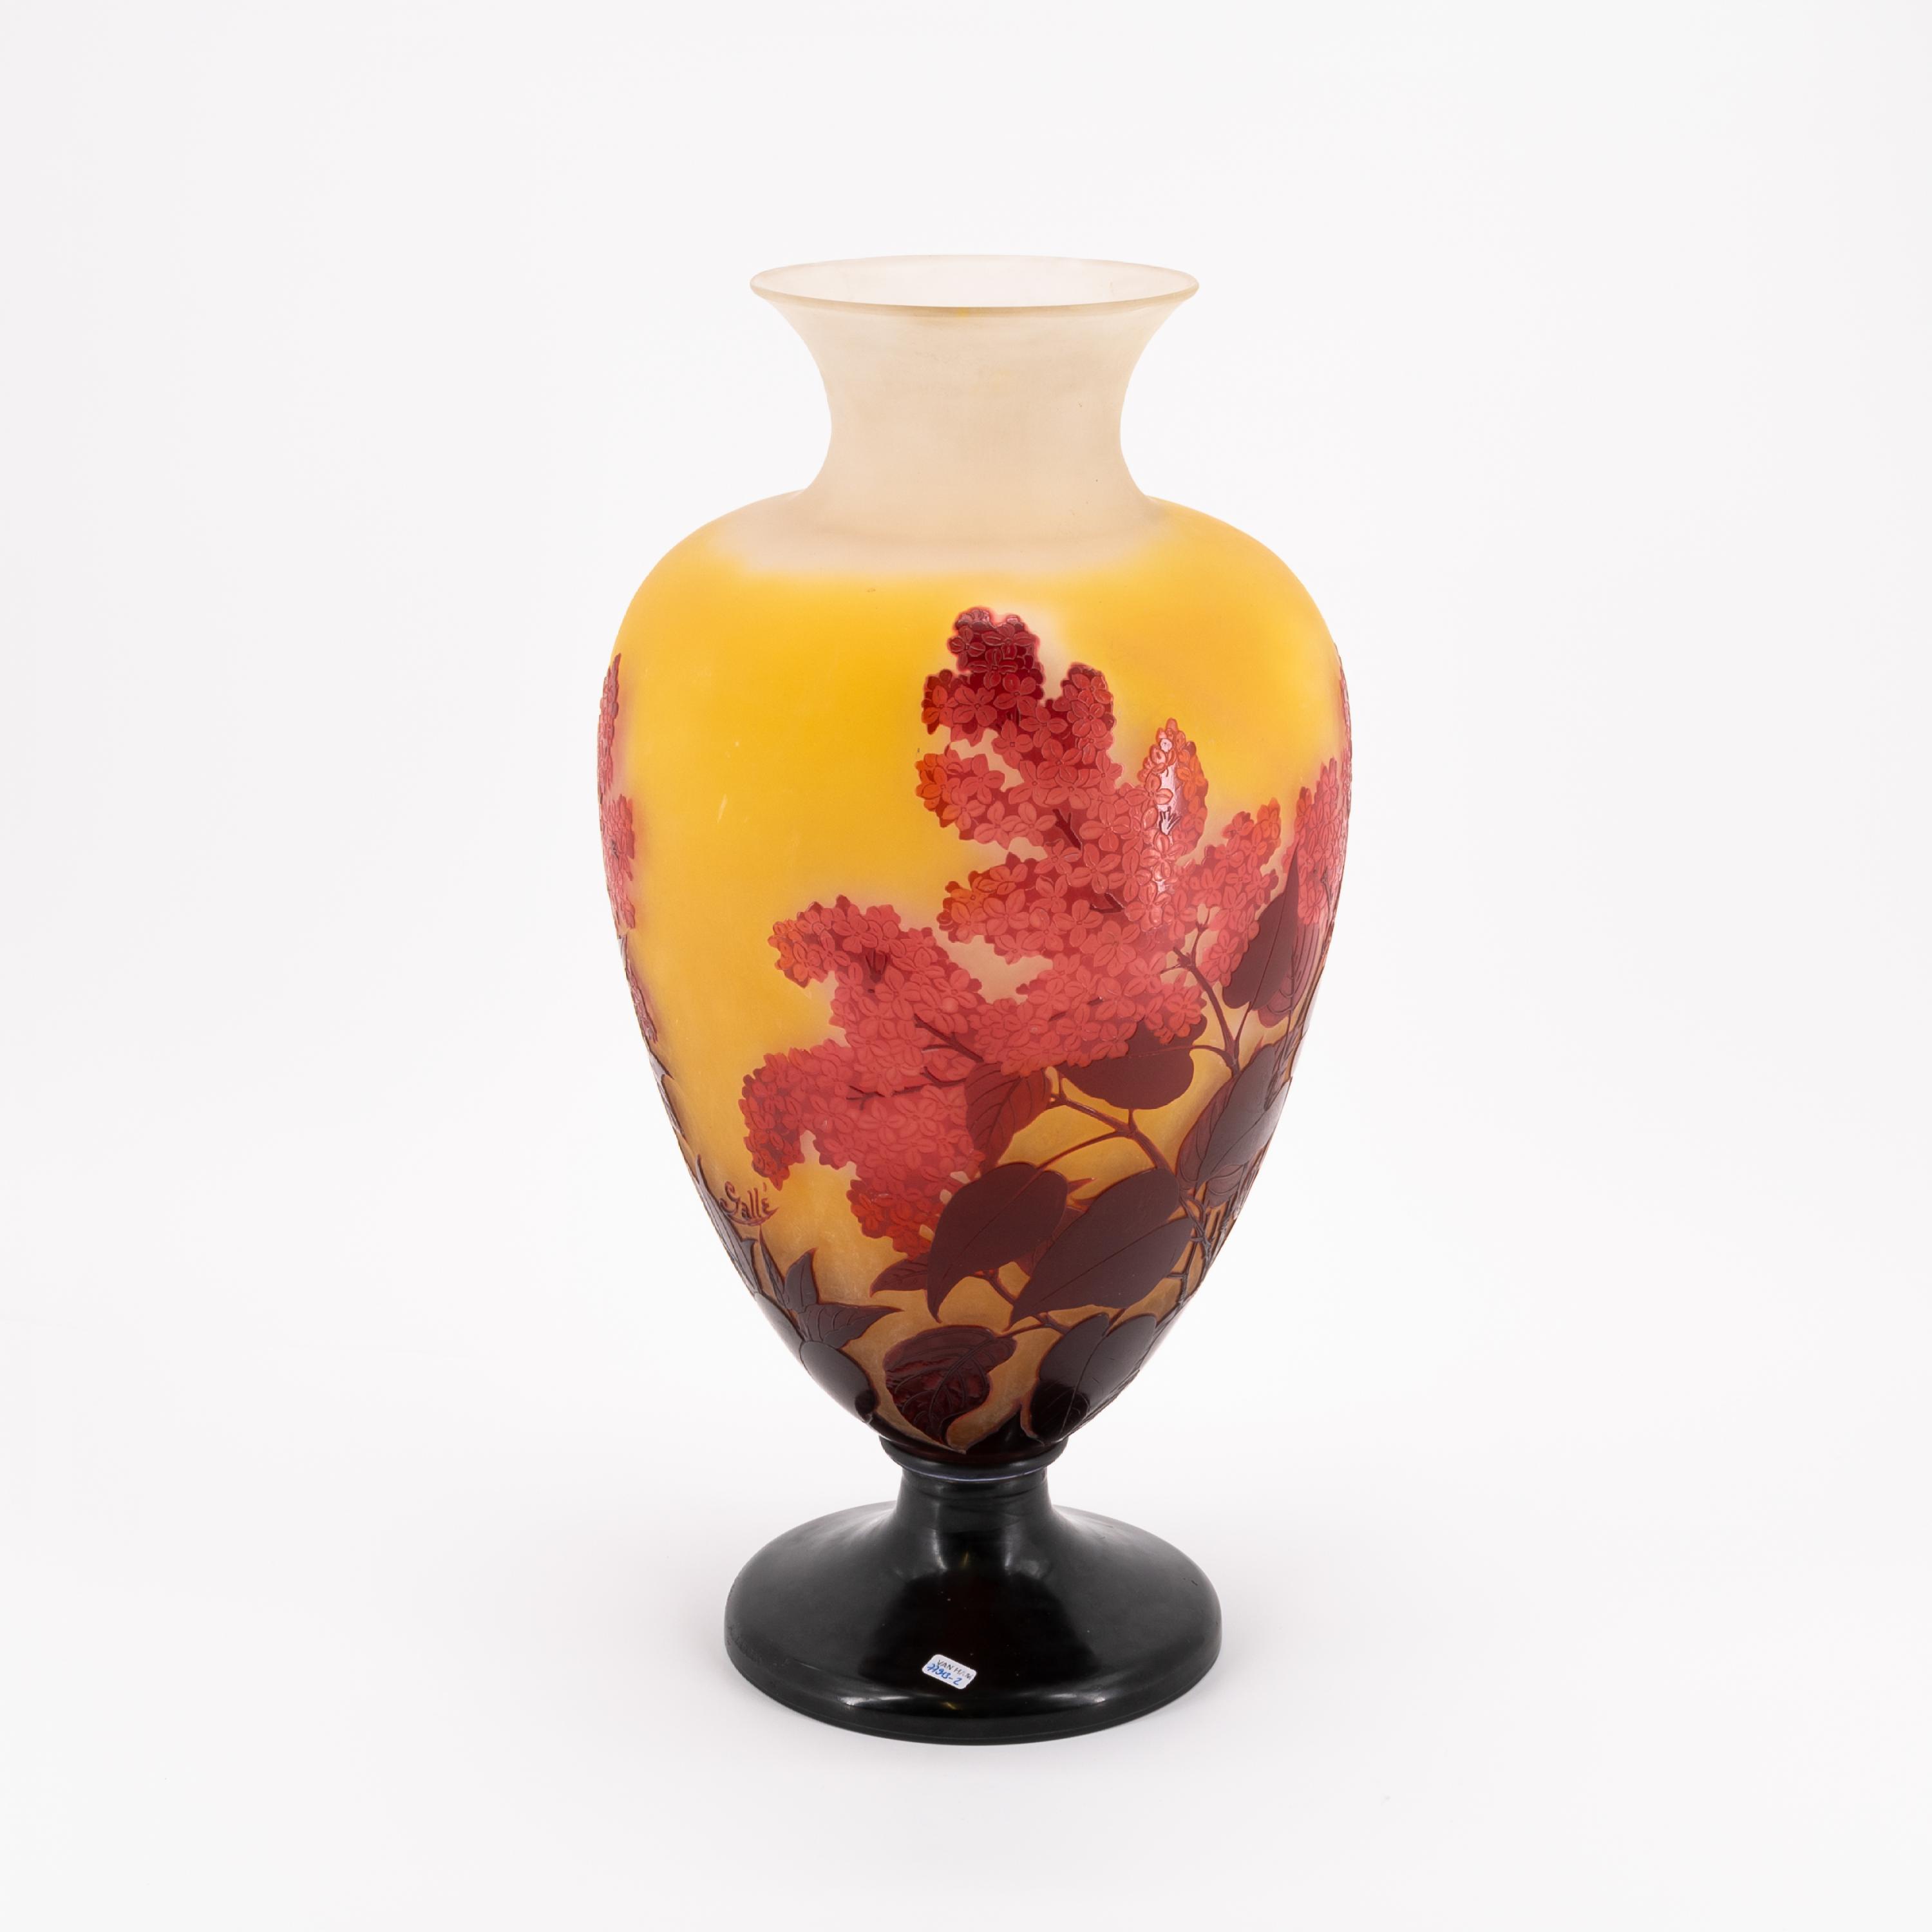 LARGE GLASS GOBLET VASE WITH LILAC BLOSSOMS - Image 4 of 8